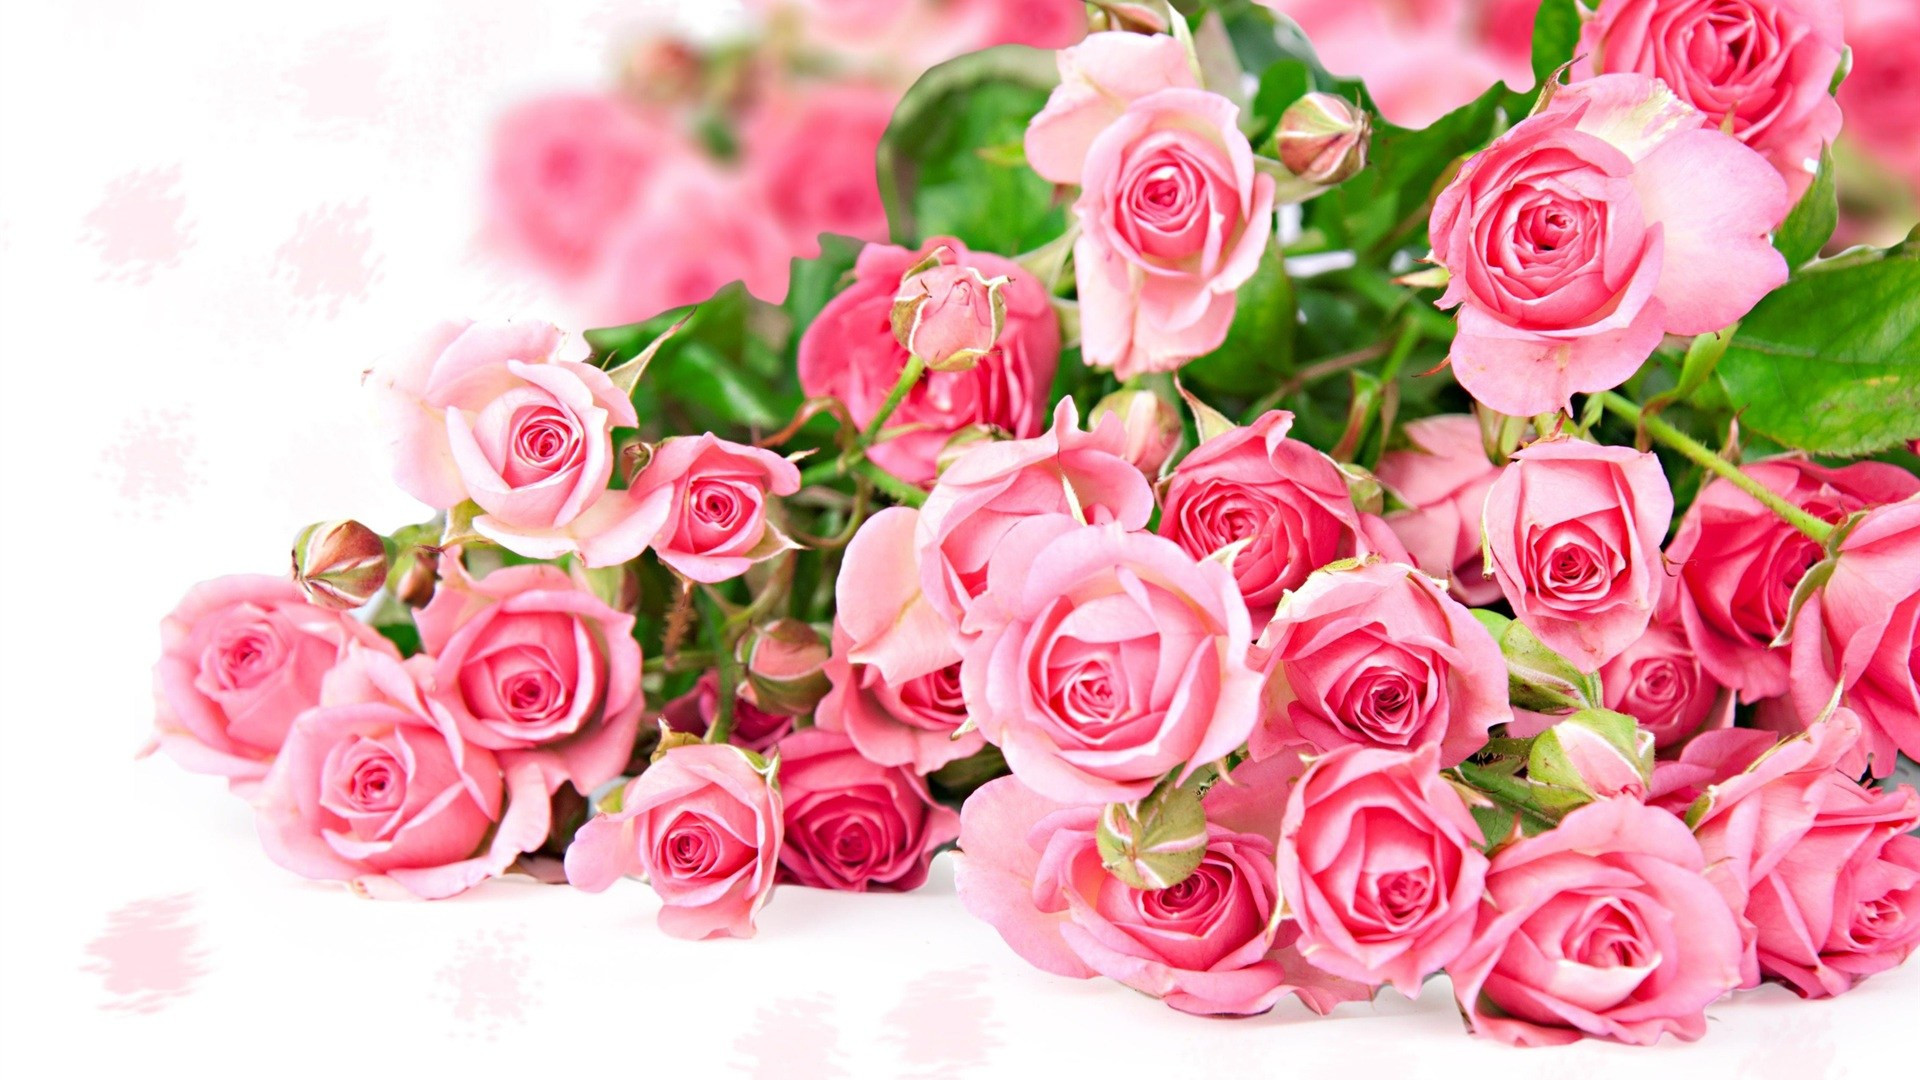 1920x1080 ... Beautiful Roses Wallpaper For Mobile World's Top 100 Beautiful Flowers  Images Wallpaper Photos ...